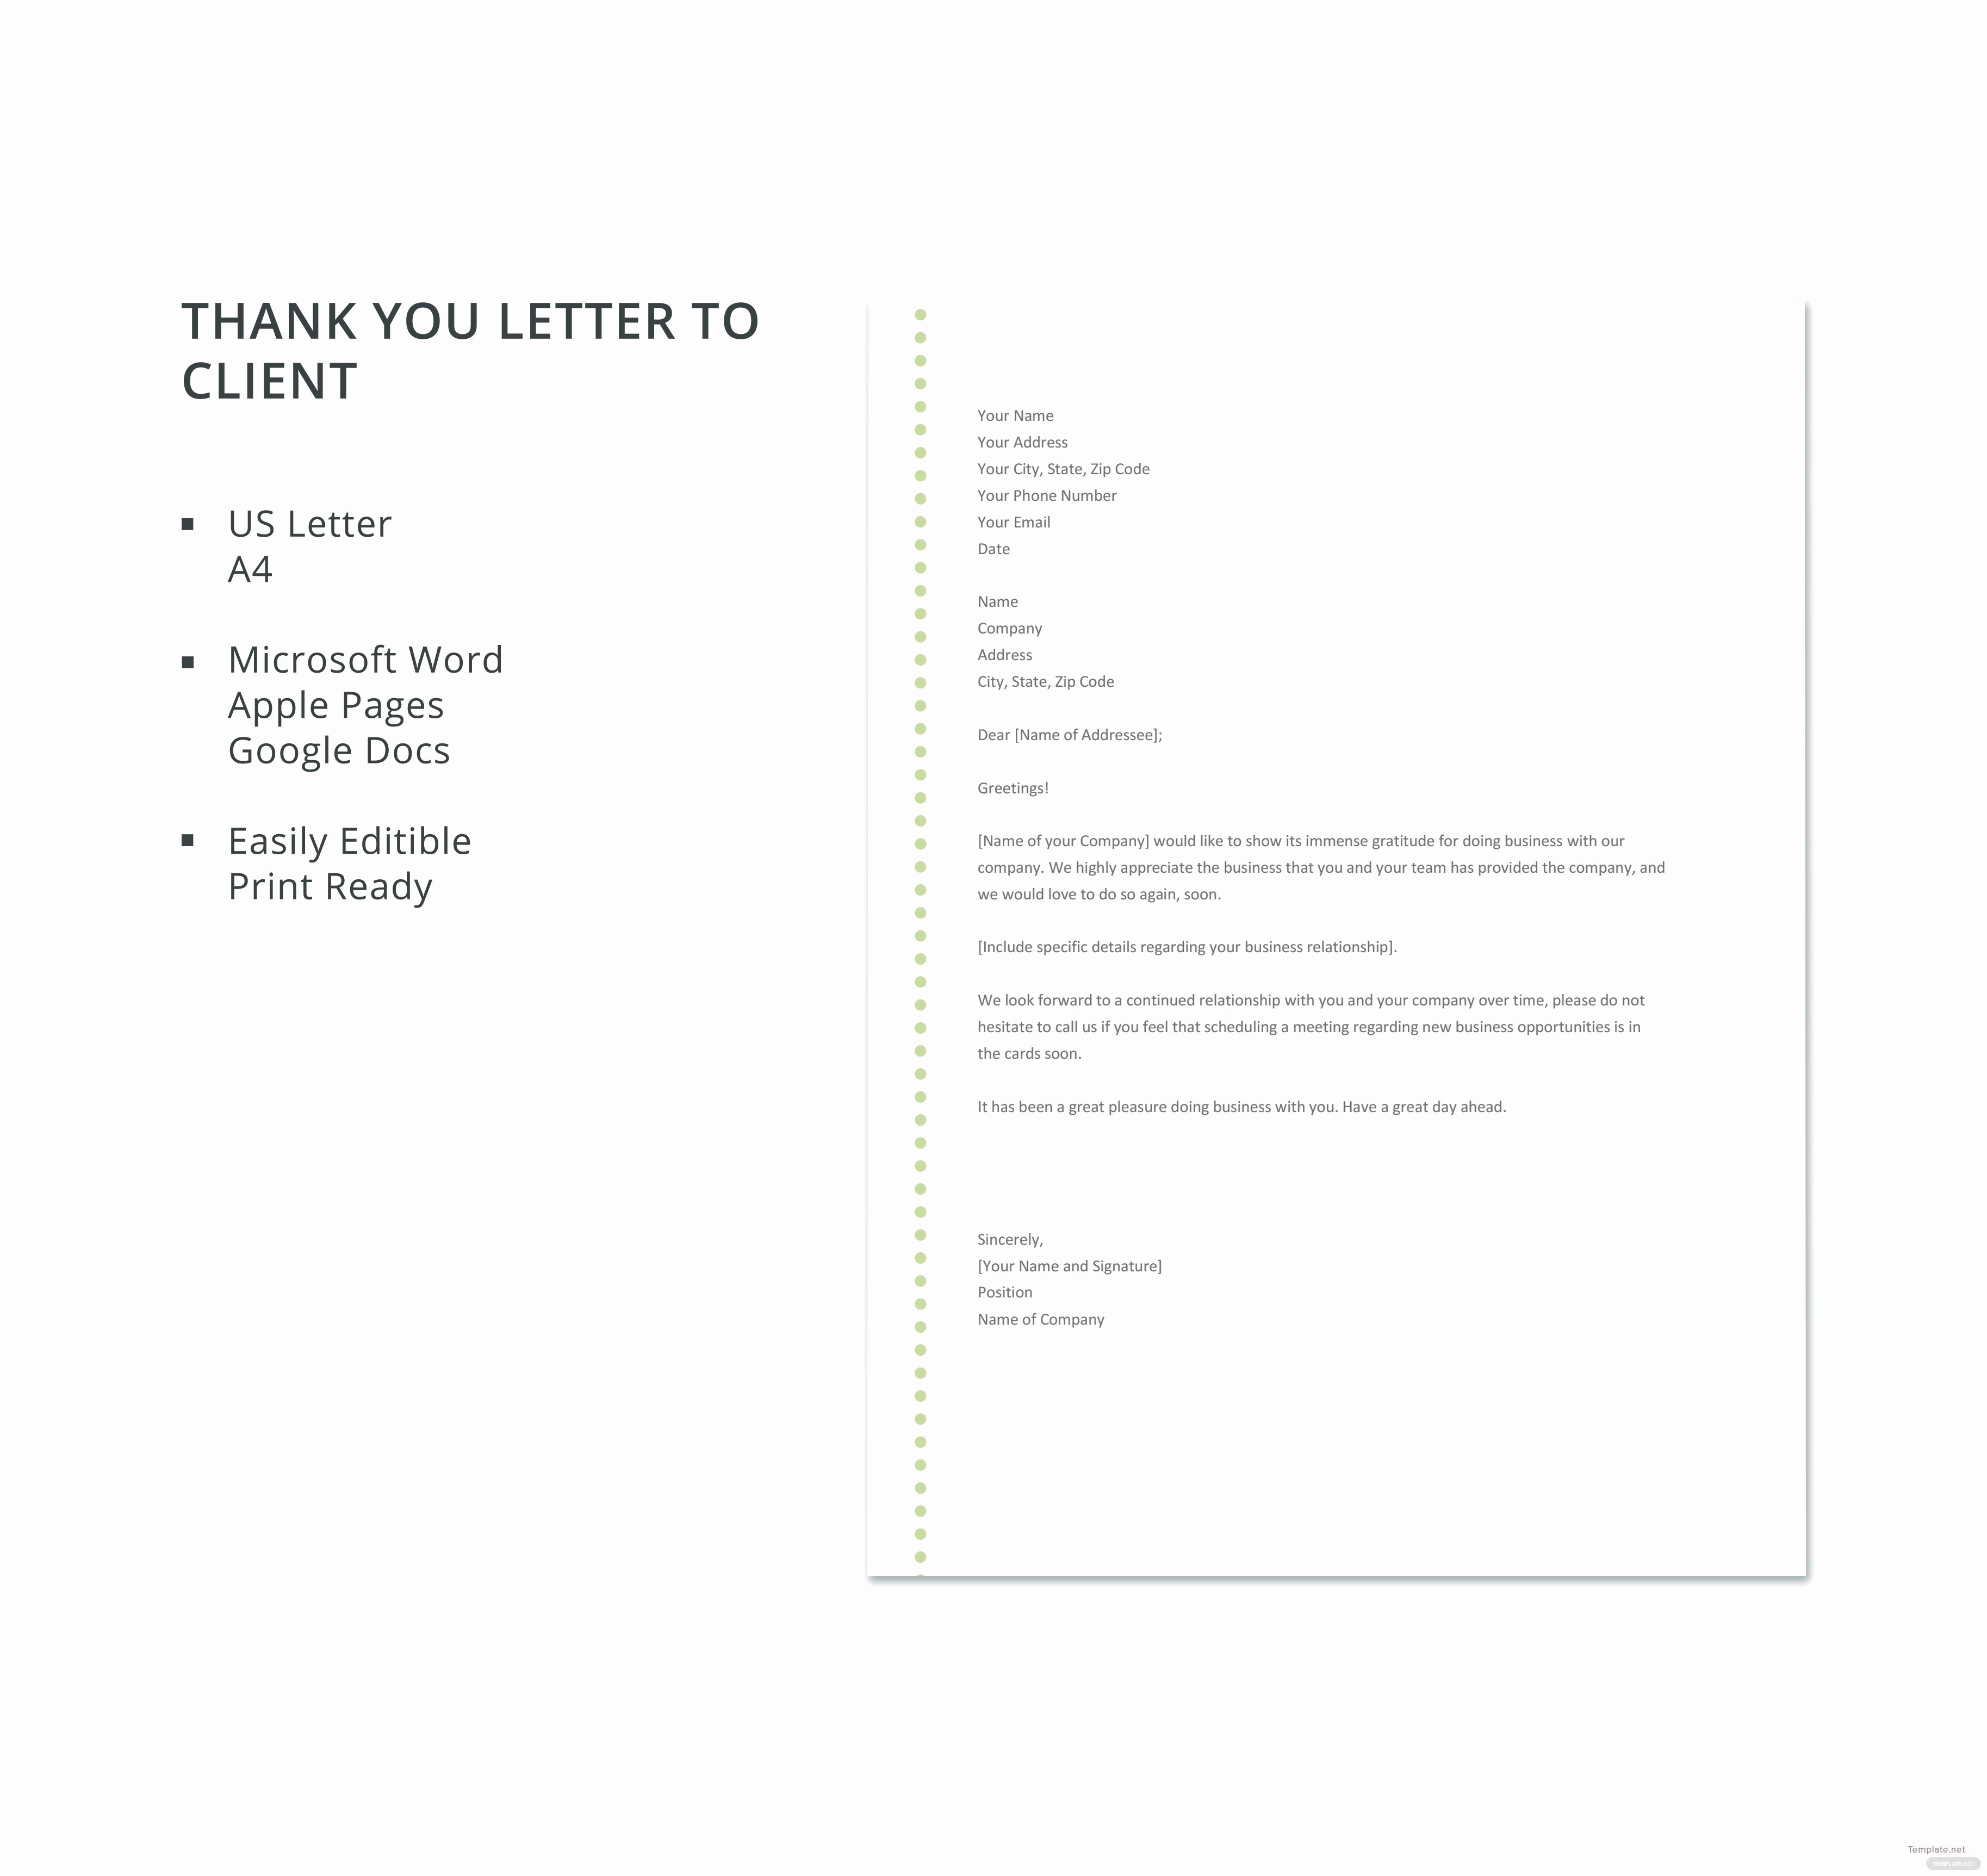 Thank You Letter to Client Inspirational Free Thank You Letter to Client Template In Microsoft Word